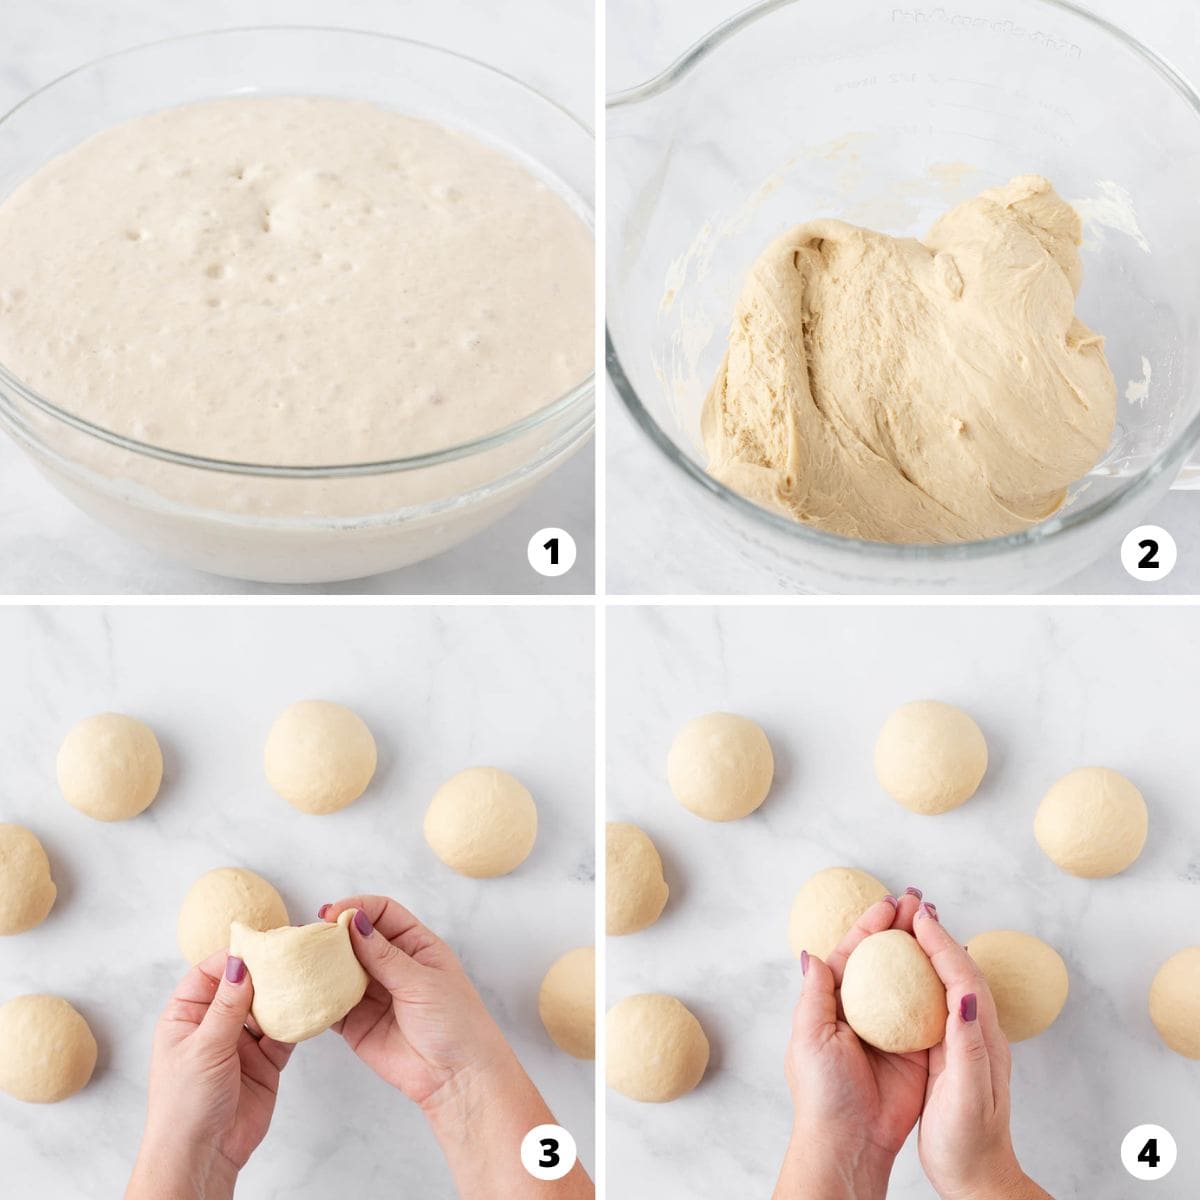 Showing how to make bagels in a 4 step collage.